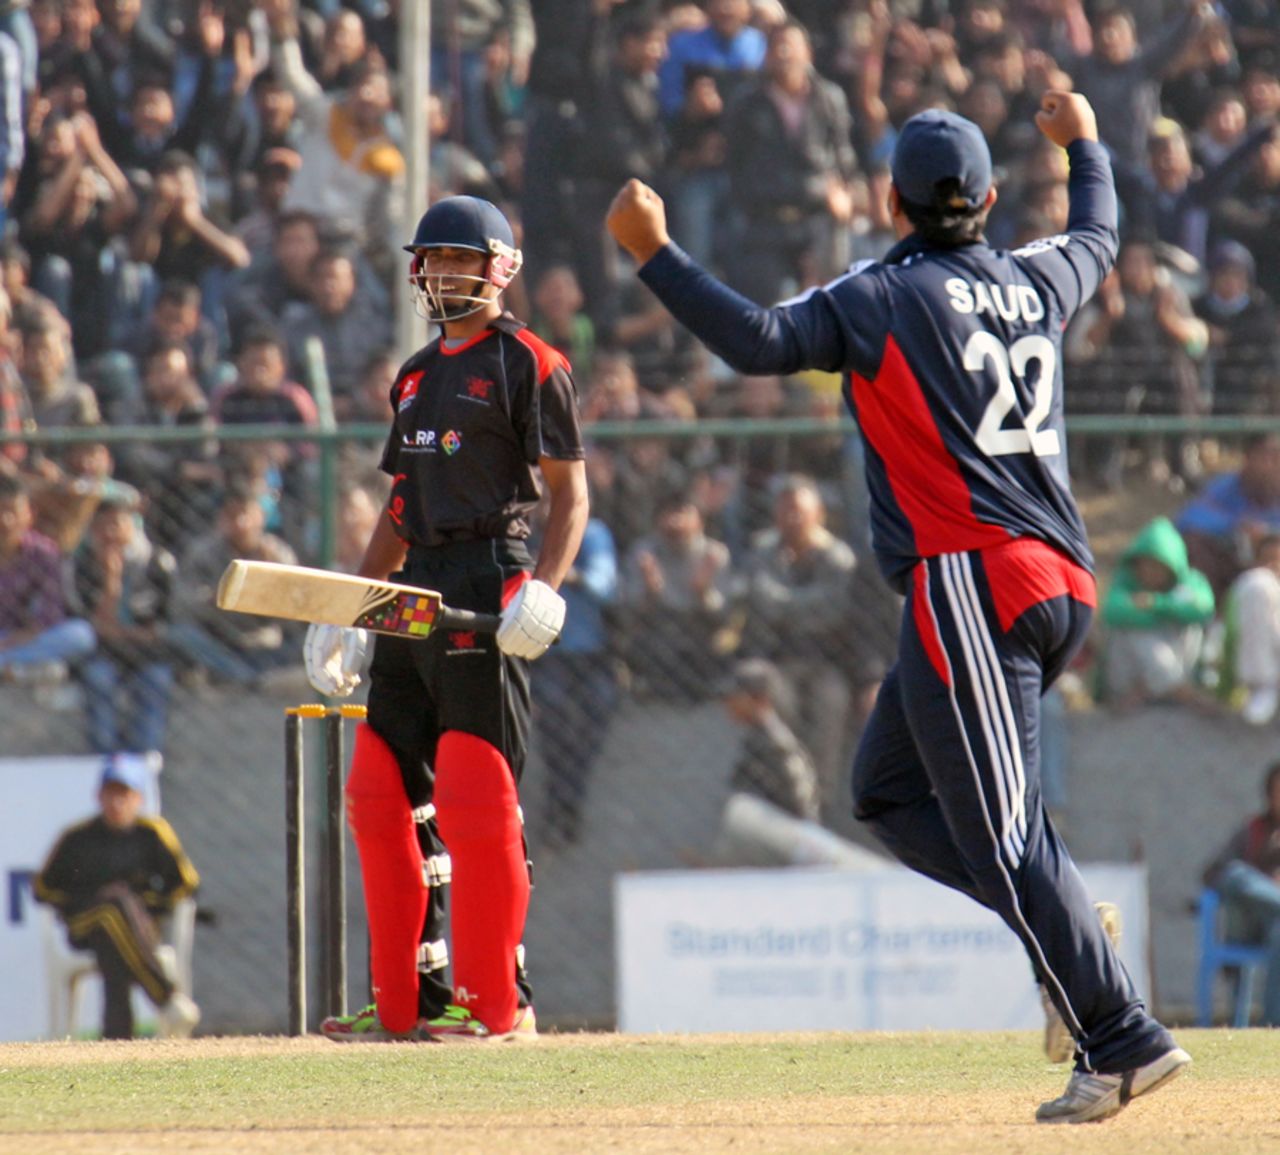 Irfan Ahmed can't believe that he's been given out LBW against Kuwait at the ACC Twenty20 Cup 2011 in Kathmandu